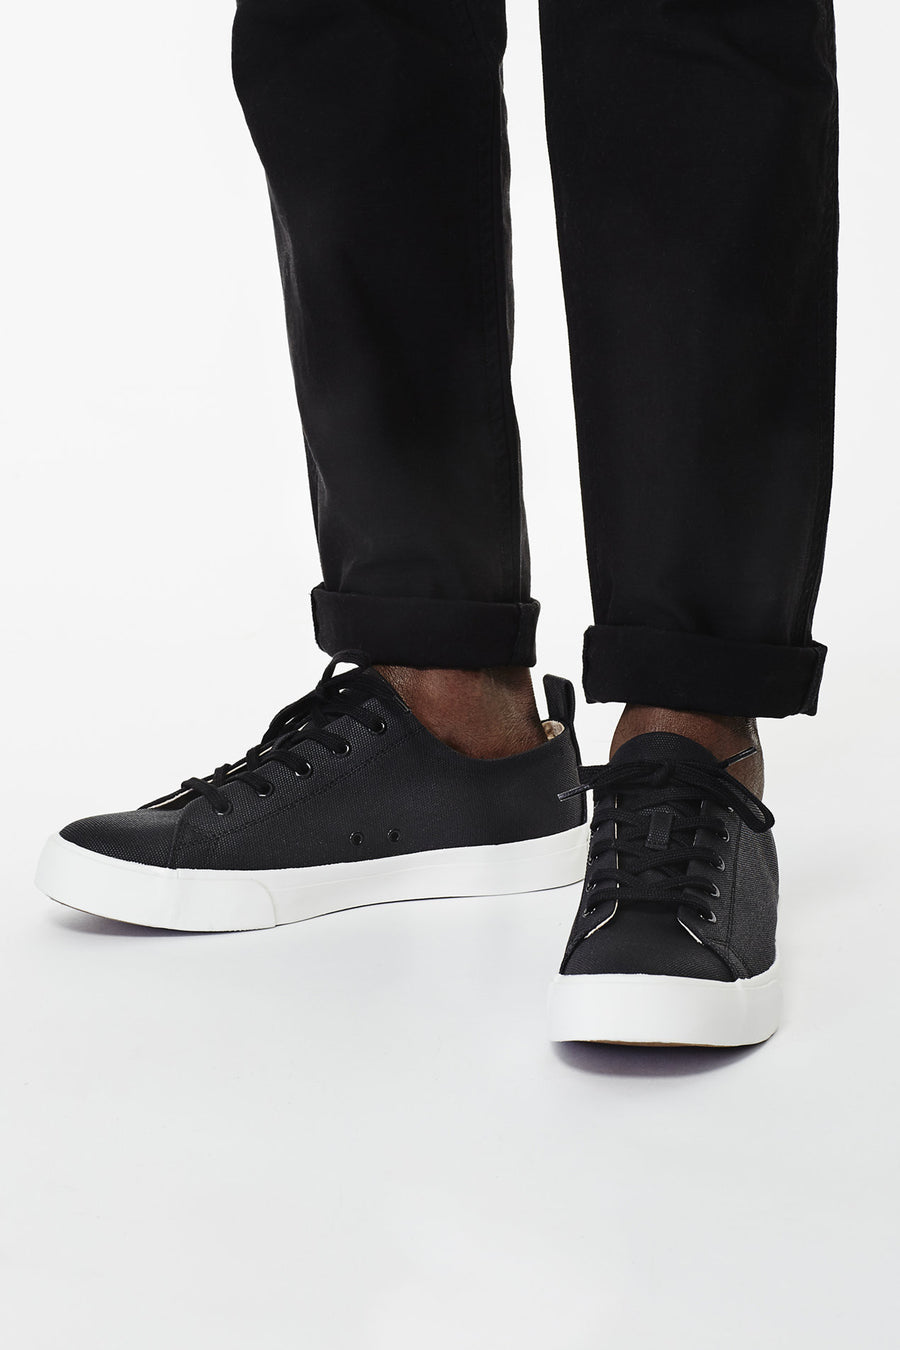 Mike Waxed Low-Top Sneakers Black - Pavilion